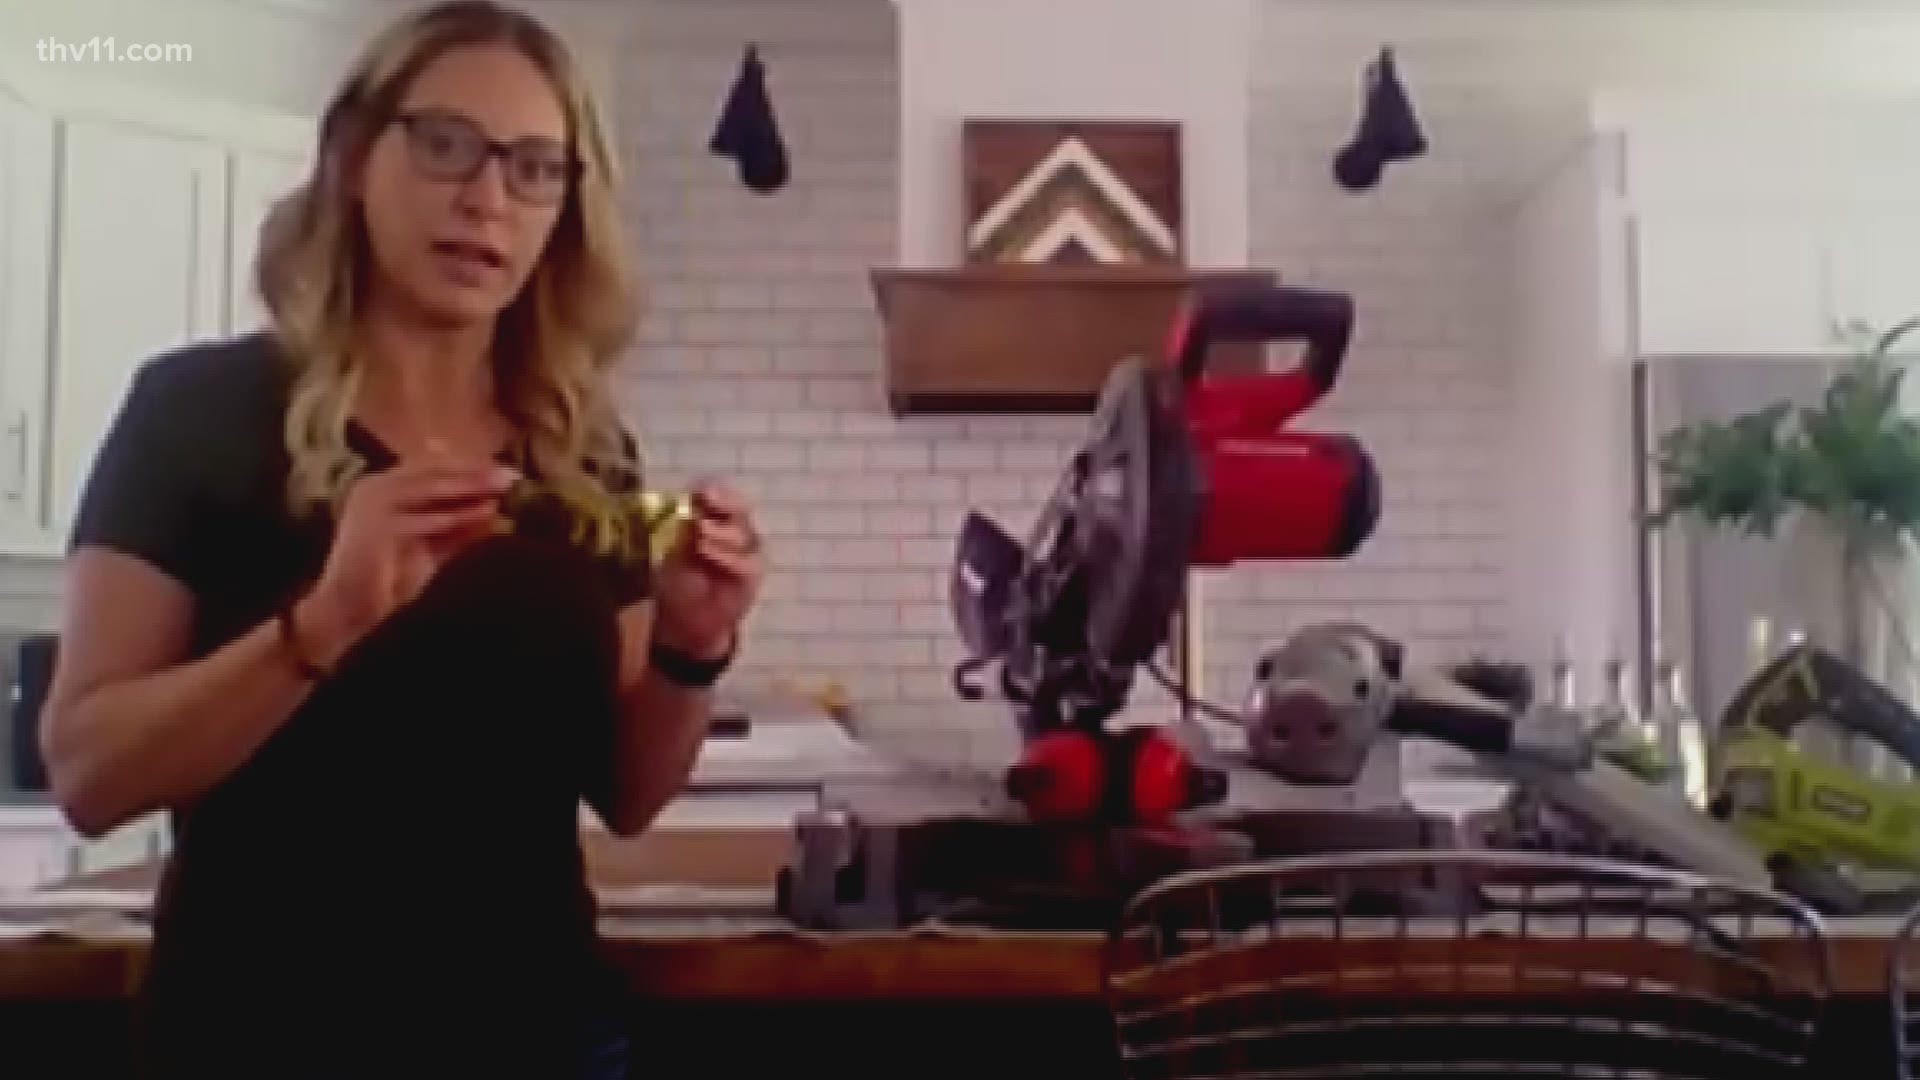 DIY enthusiast Cora Gray just finished a huge kitchen renovation and she says her safety glasses and gloves were the most important tools she used!